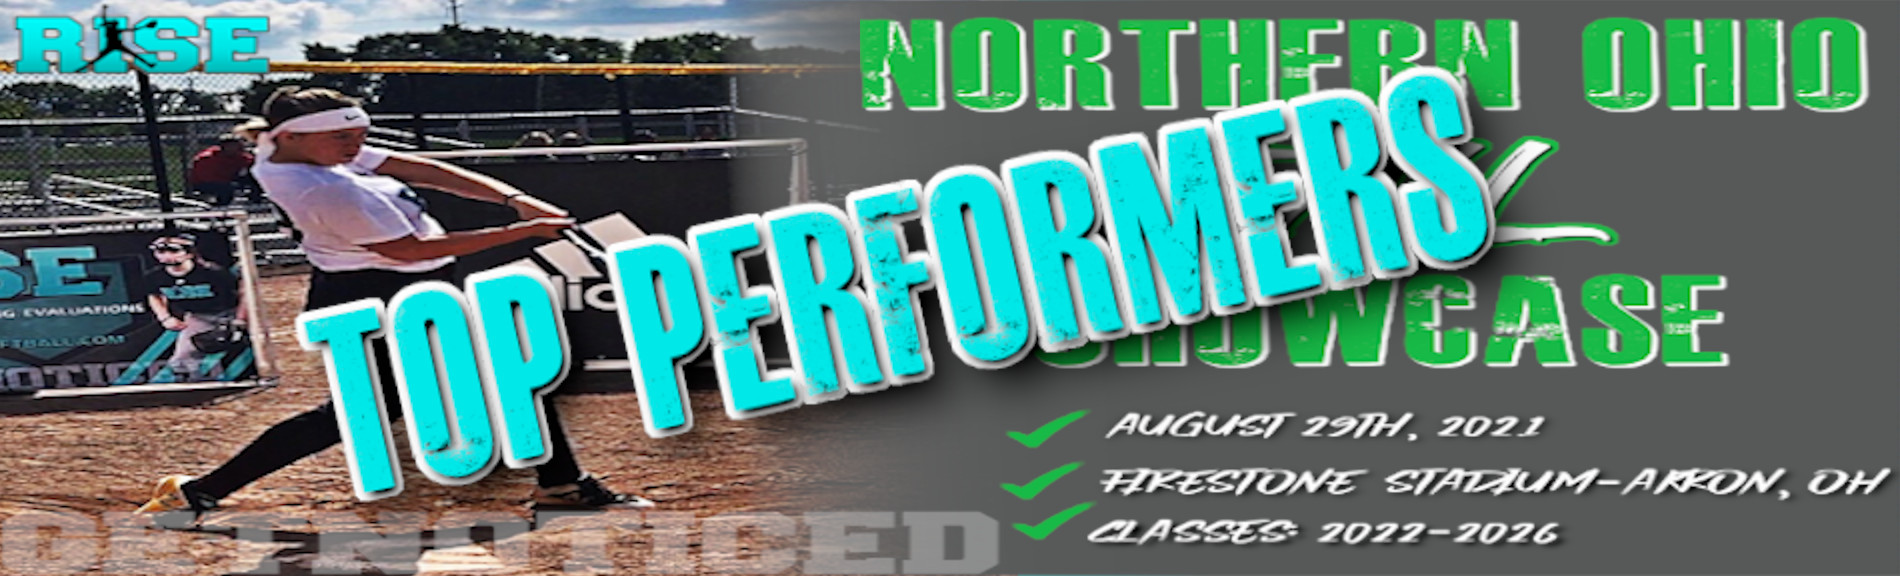 Northern Ohio Fall Showcase “TOP PERFORMERS”